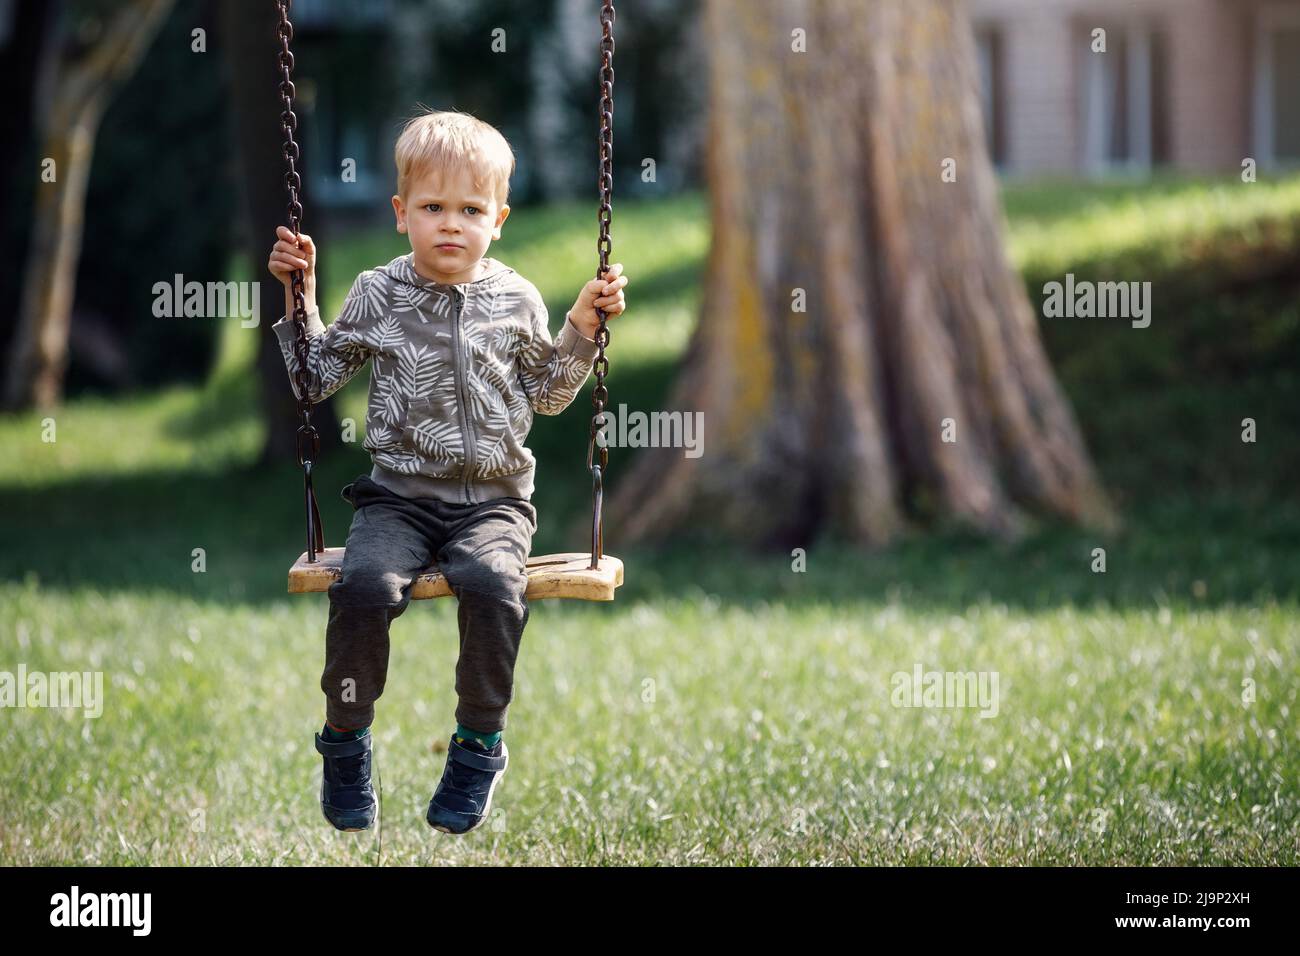 A sad, dreaming little boy swings in a city park under a big tree. Horizontal photo. Stock Photo